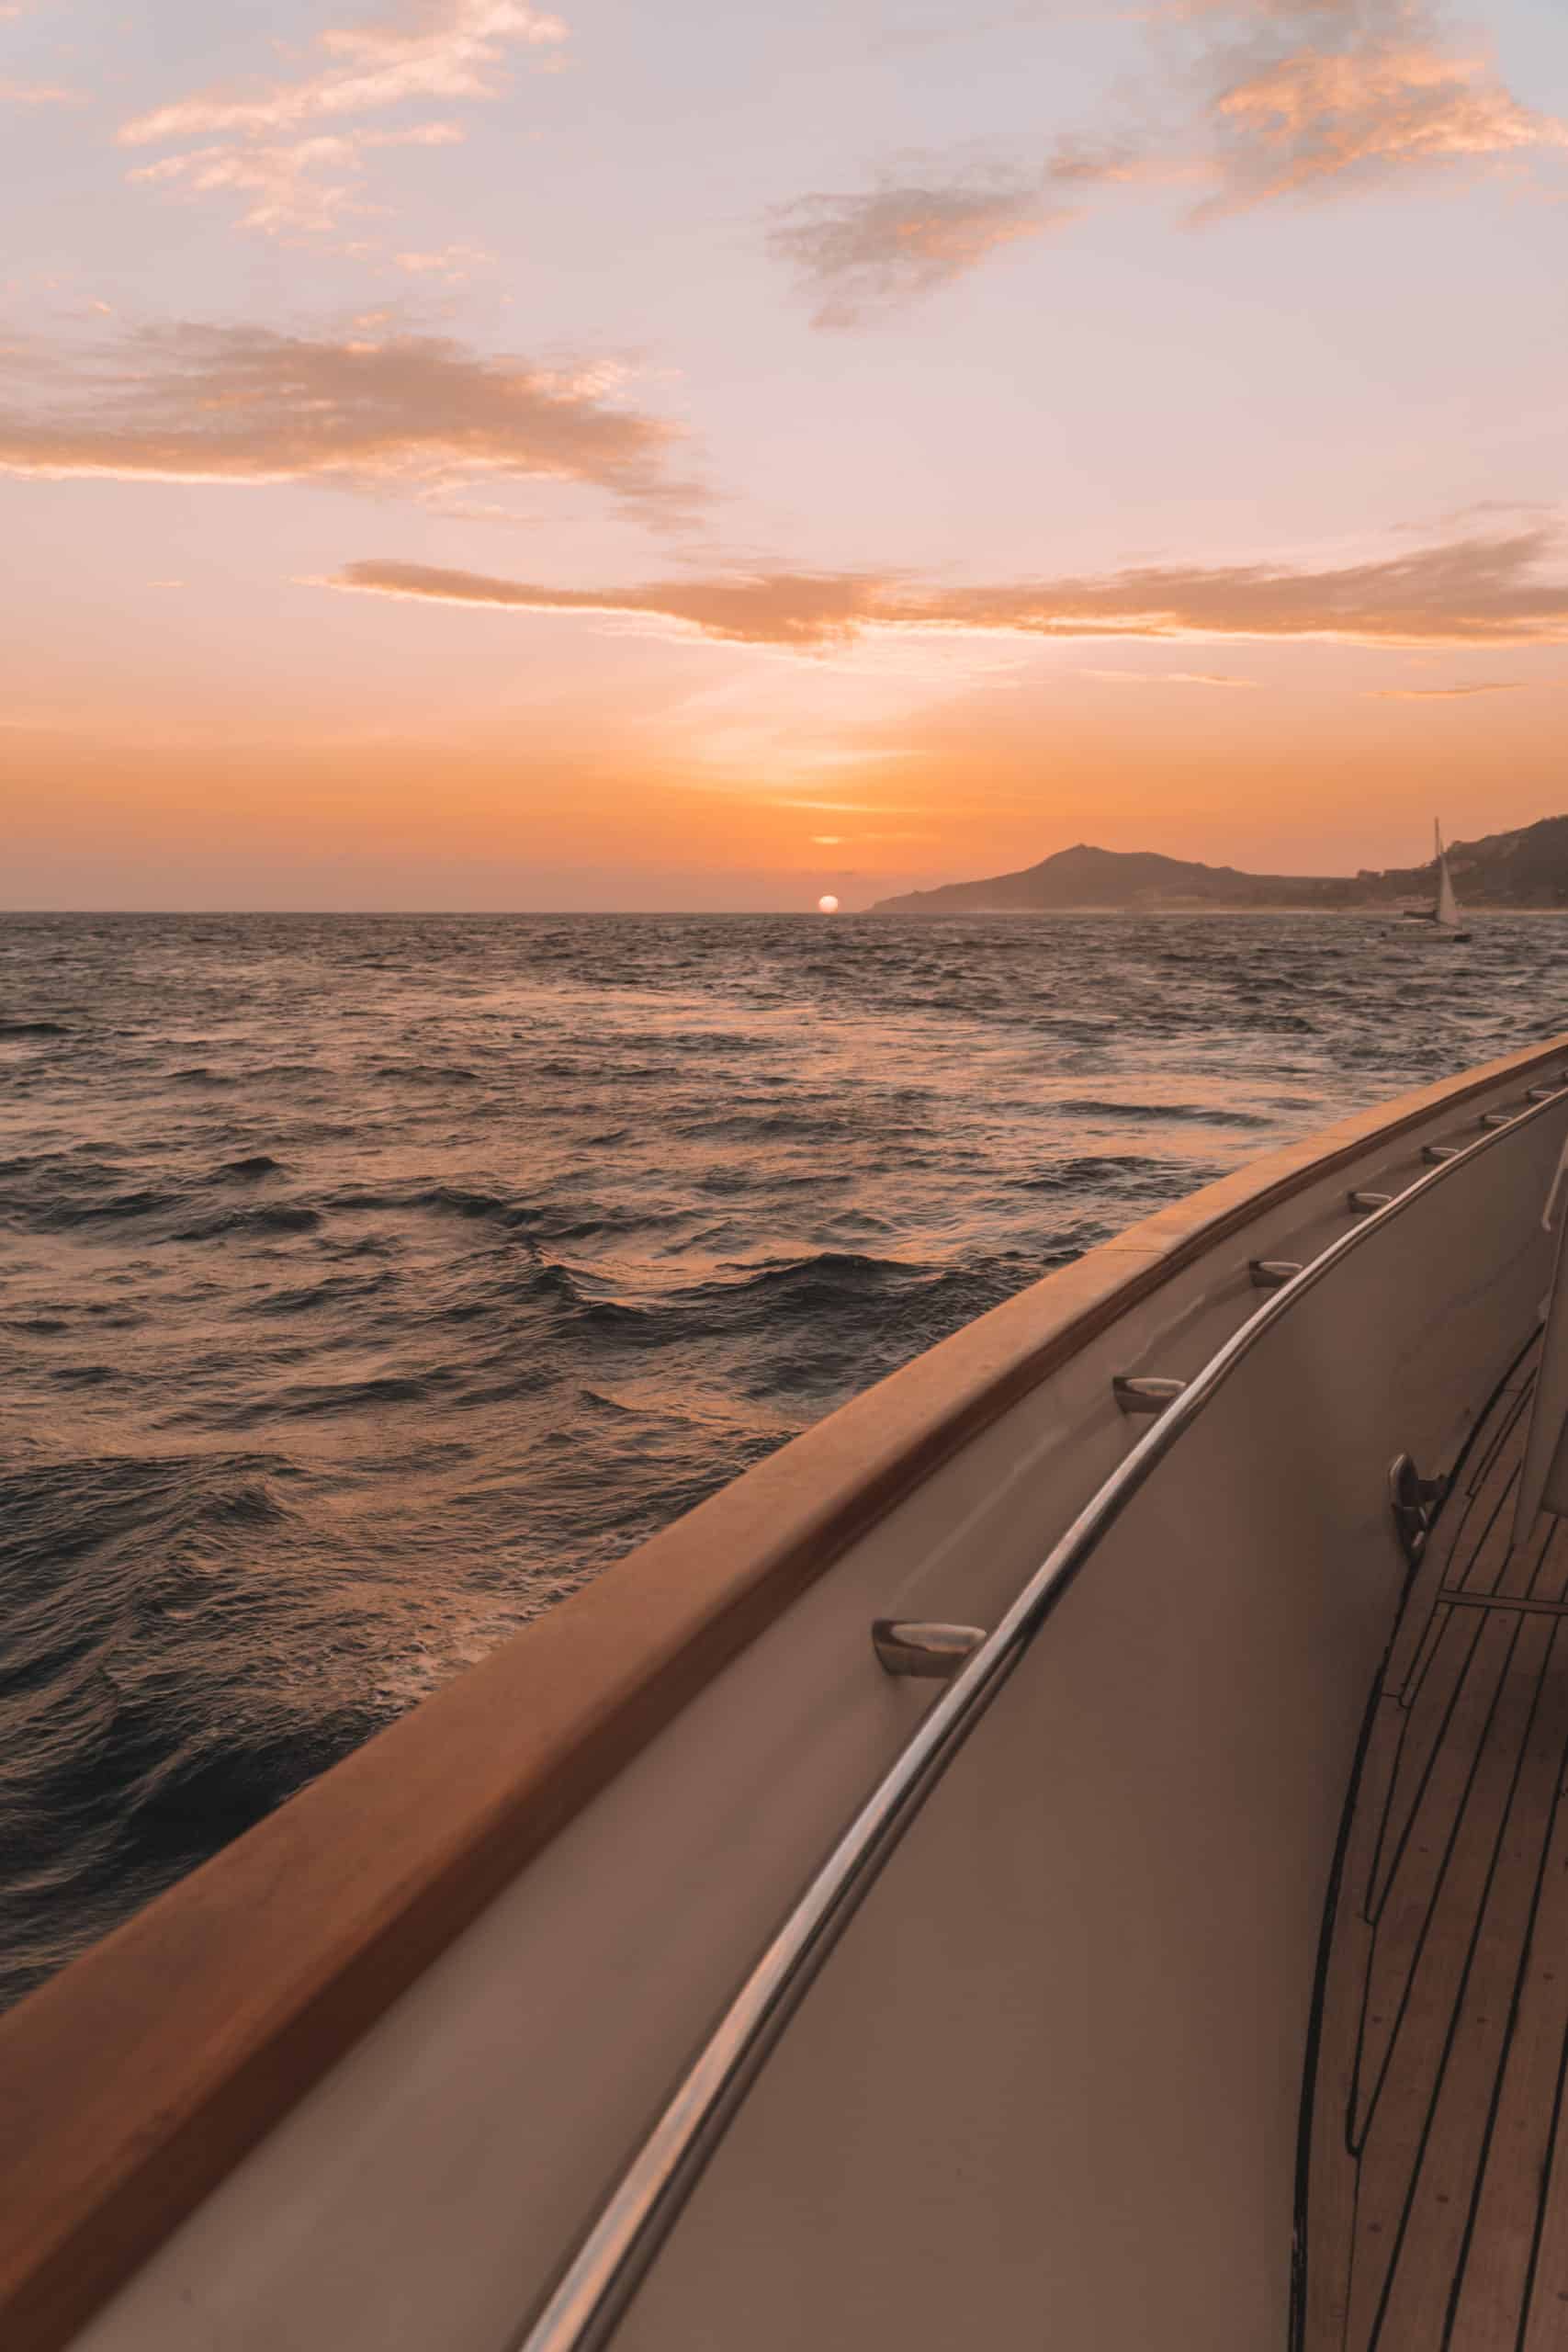 Sunset views from Contessa Yacht in Cabo San Lucas, Mexico